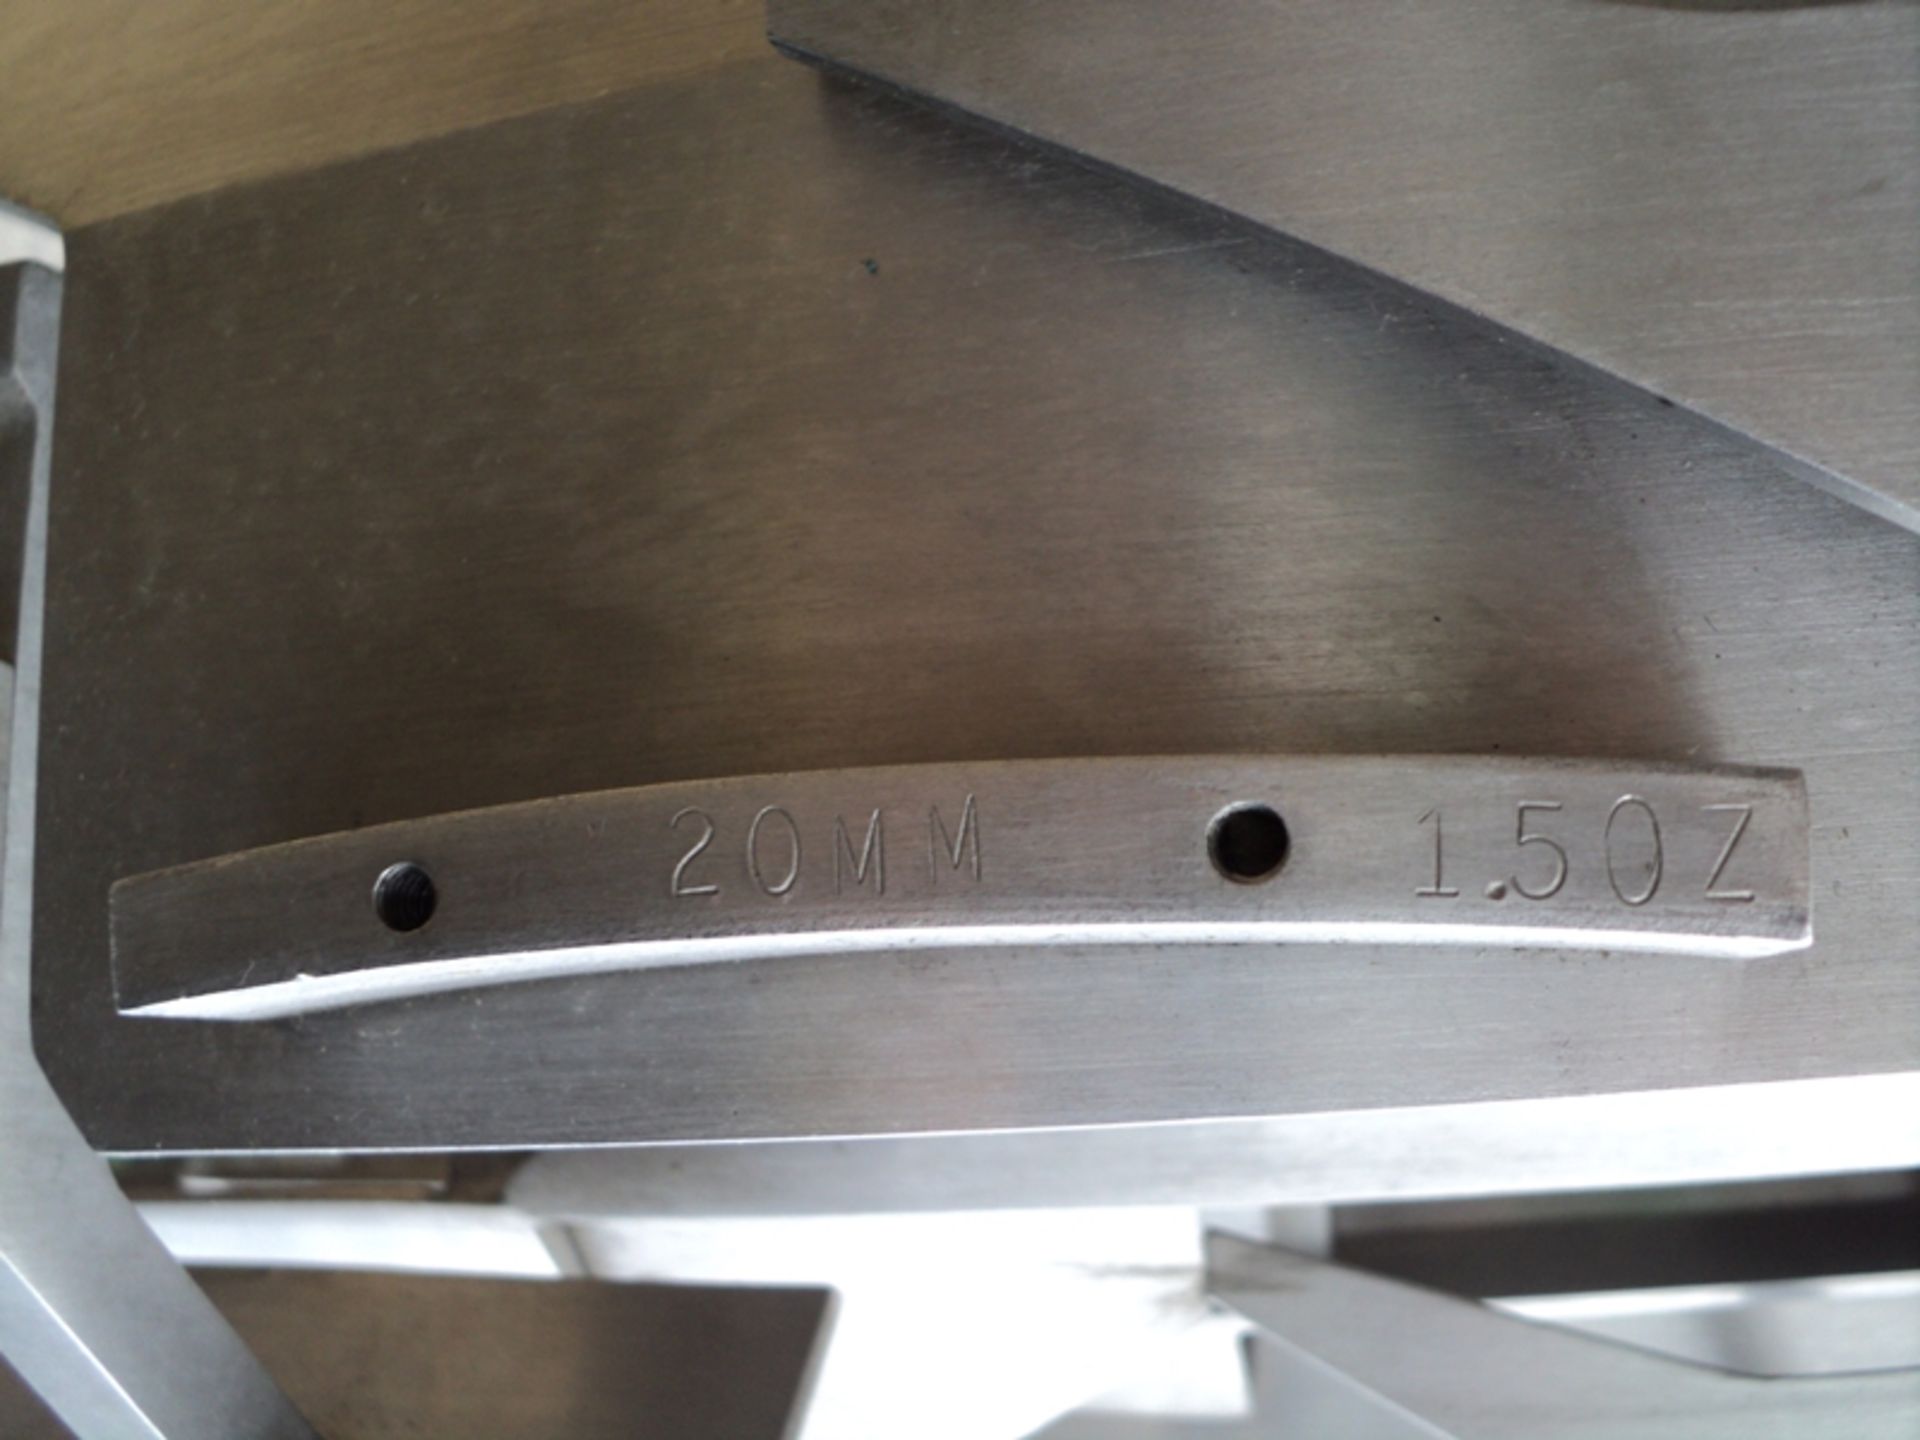 Service Engineering Vibratory Bowl 24" S/N 21614 24" CW Vibratory Feeder Rate 70 PPM Foot print: - Image 7 of 9